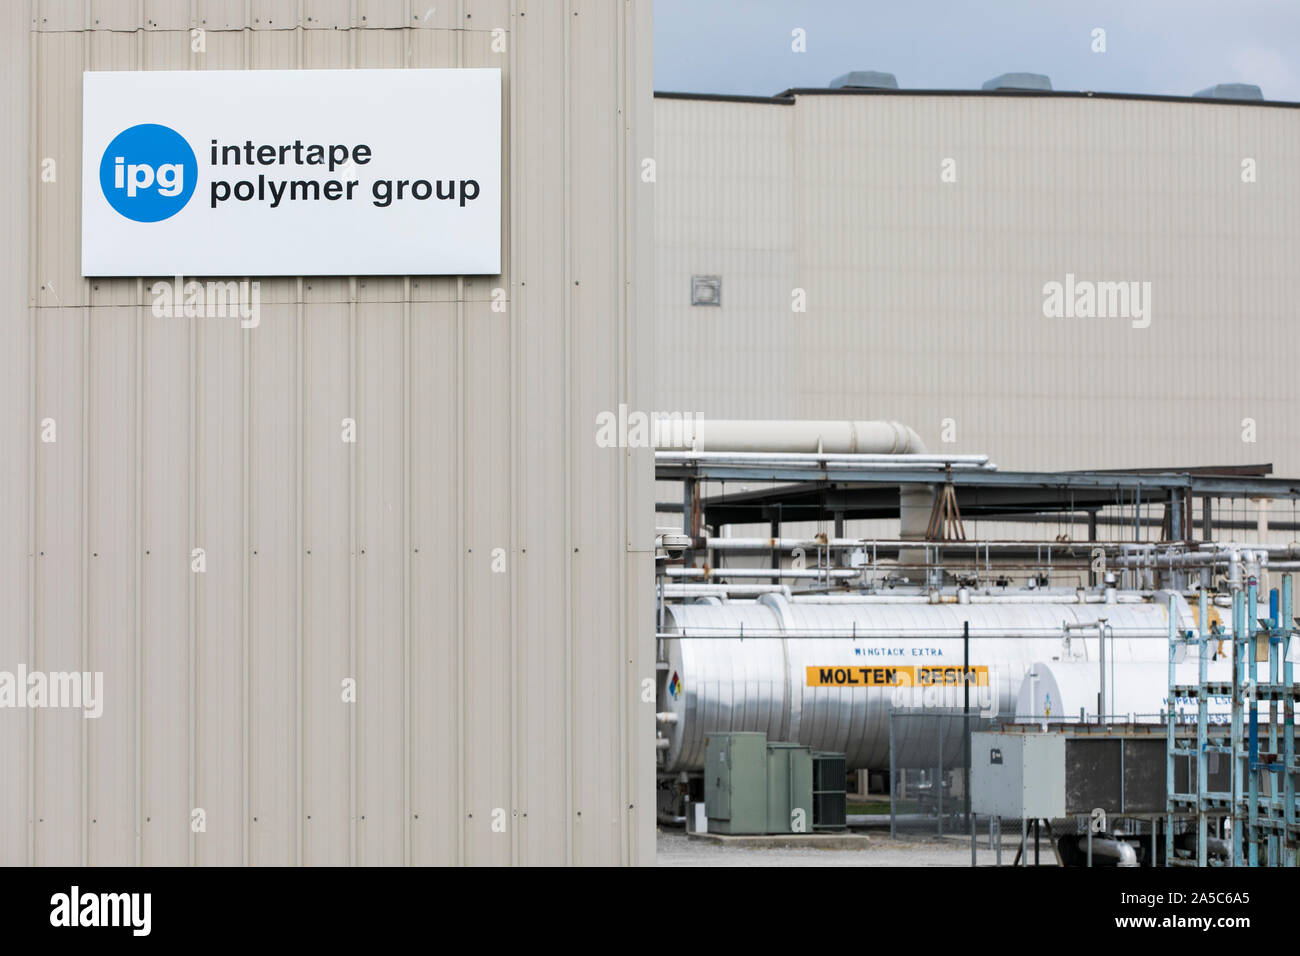 A logo sign outside of a facility occupied by the Intertape Polymer Group in Danville, Virginia on September 15, 2019. Stock Photo